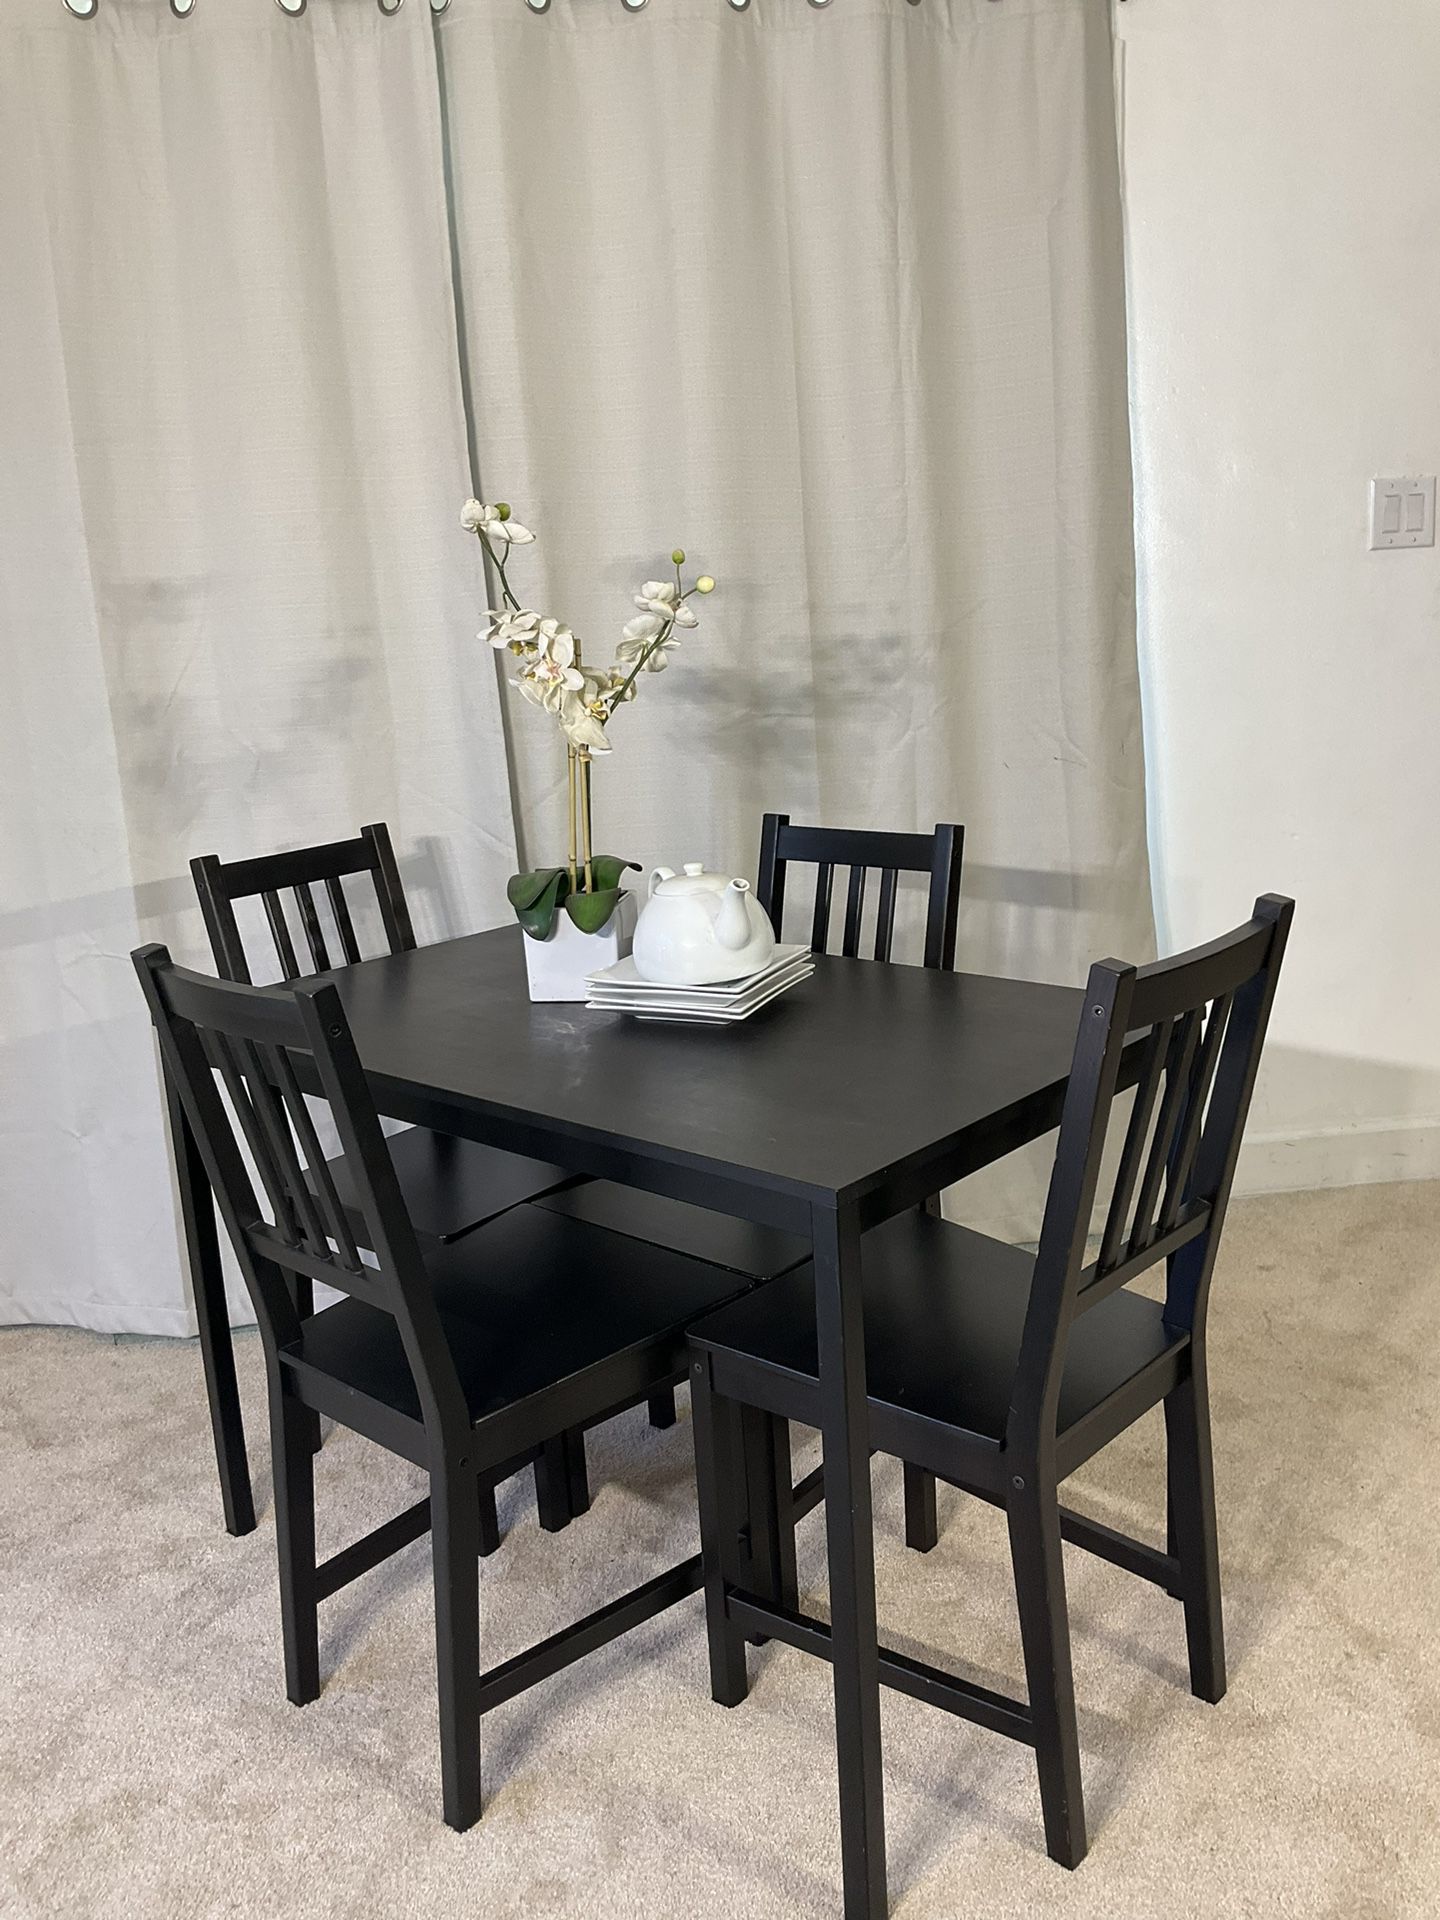 Black Compact Kitchen Dining Table & 4 Chairs PERFECT FOR SMALL PLACE!